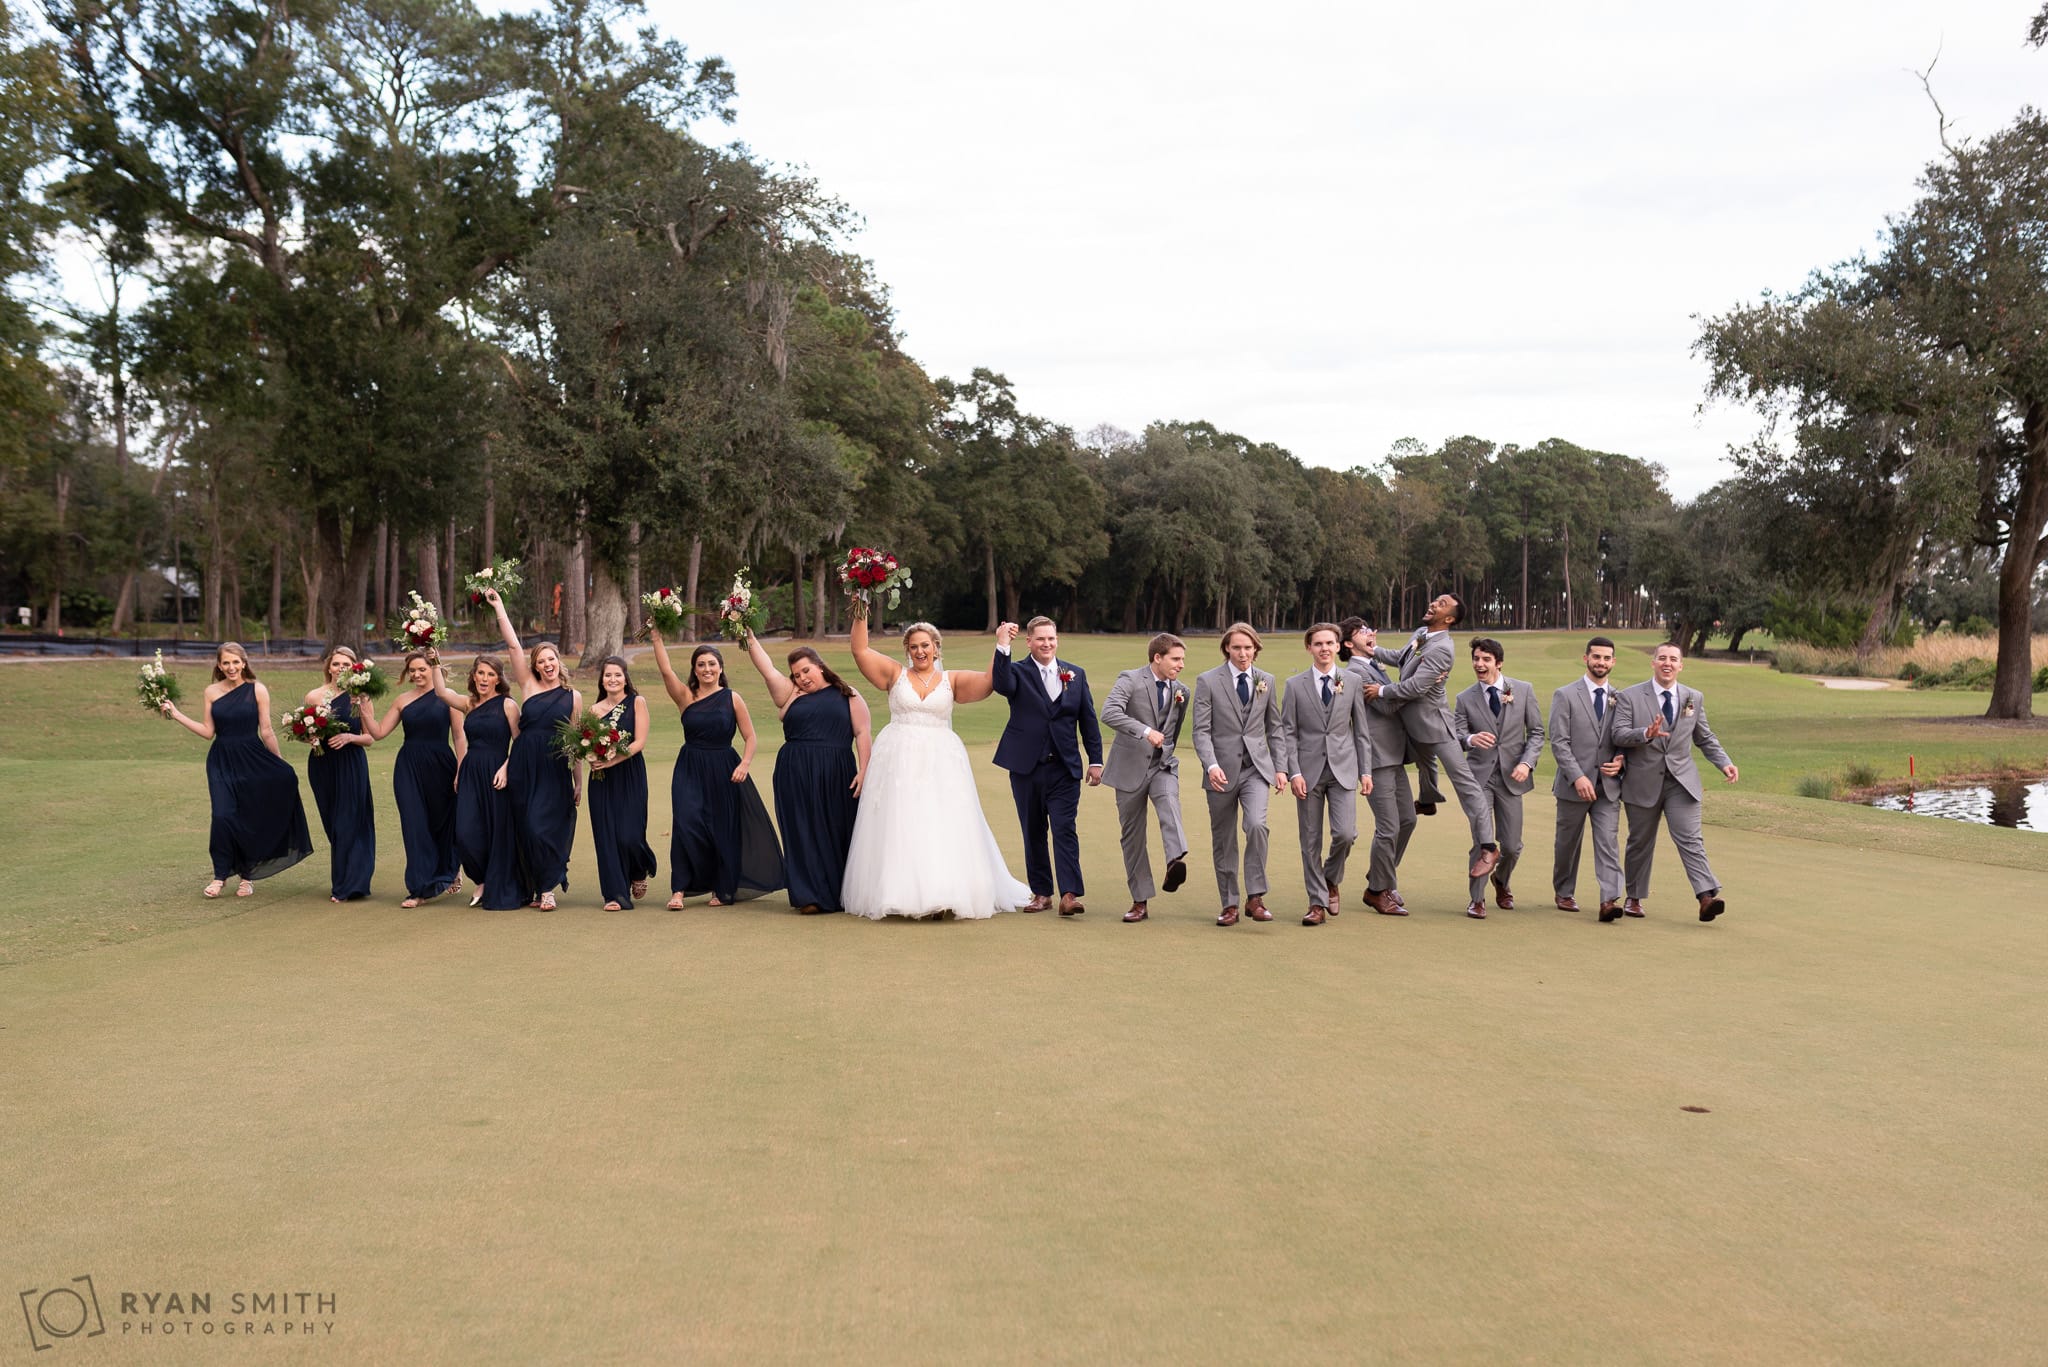 Huge bridal party walking down the golf course having fun